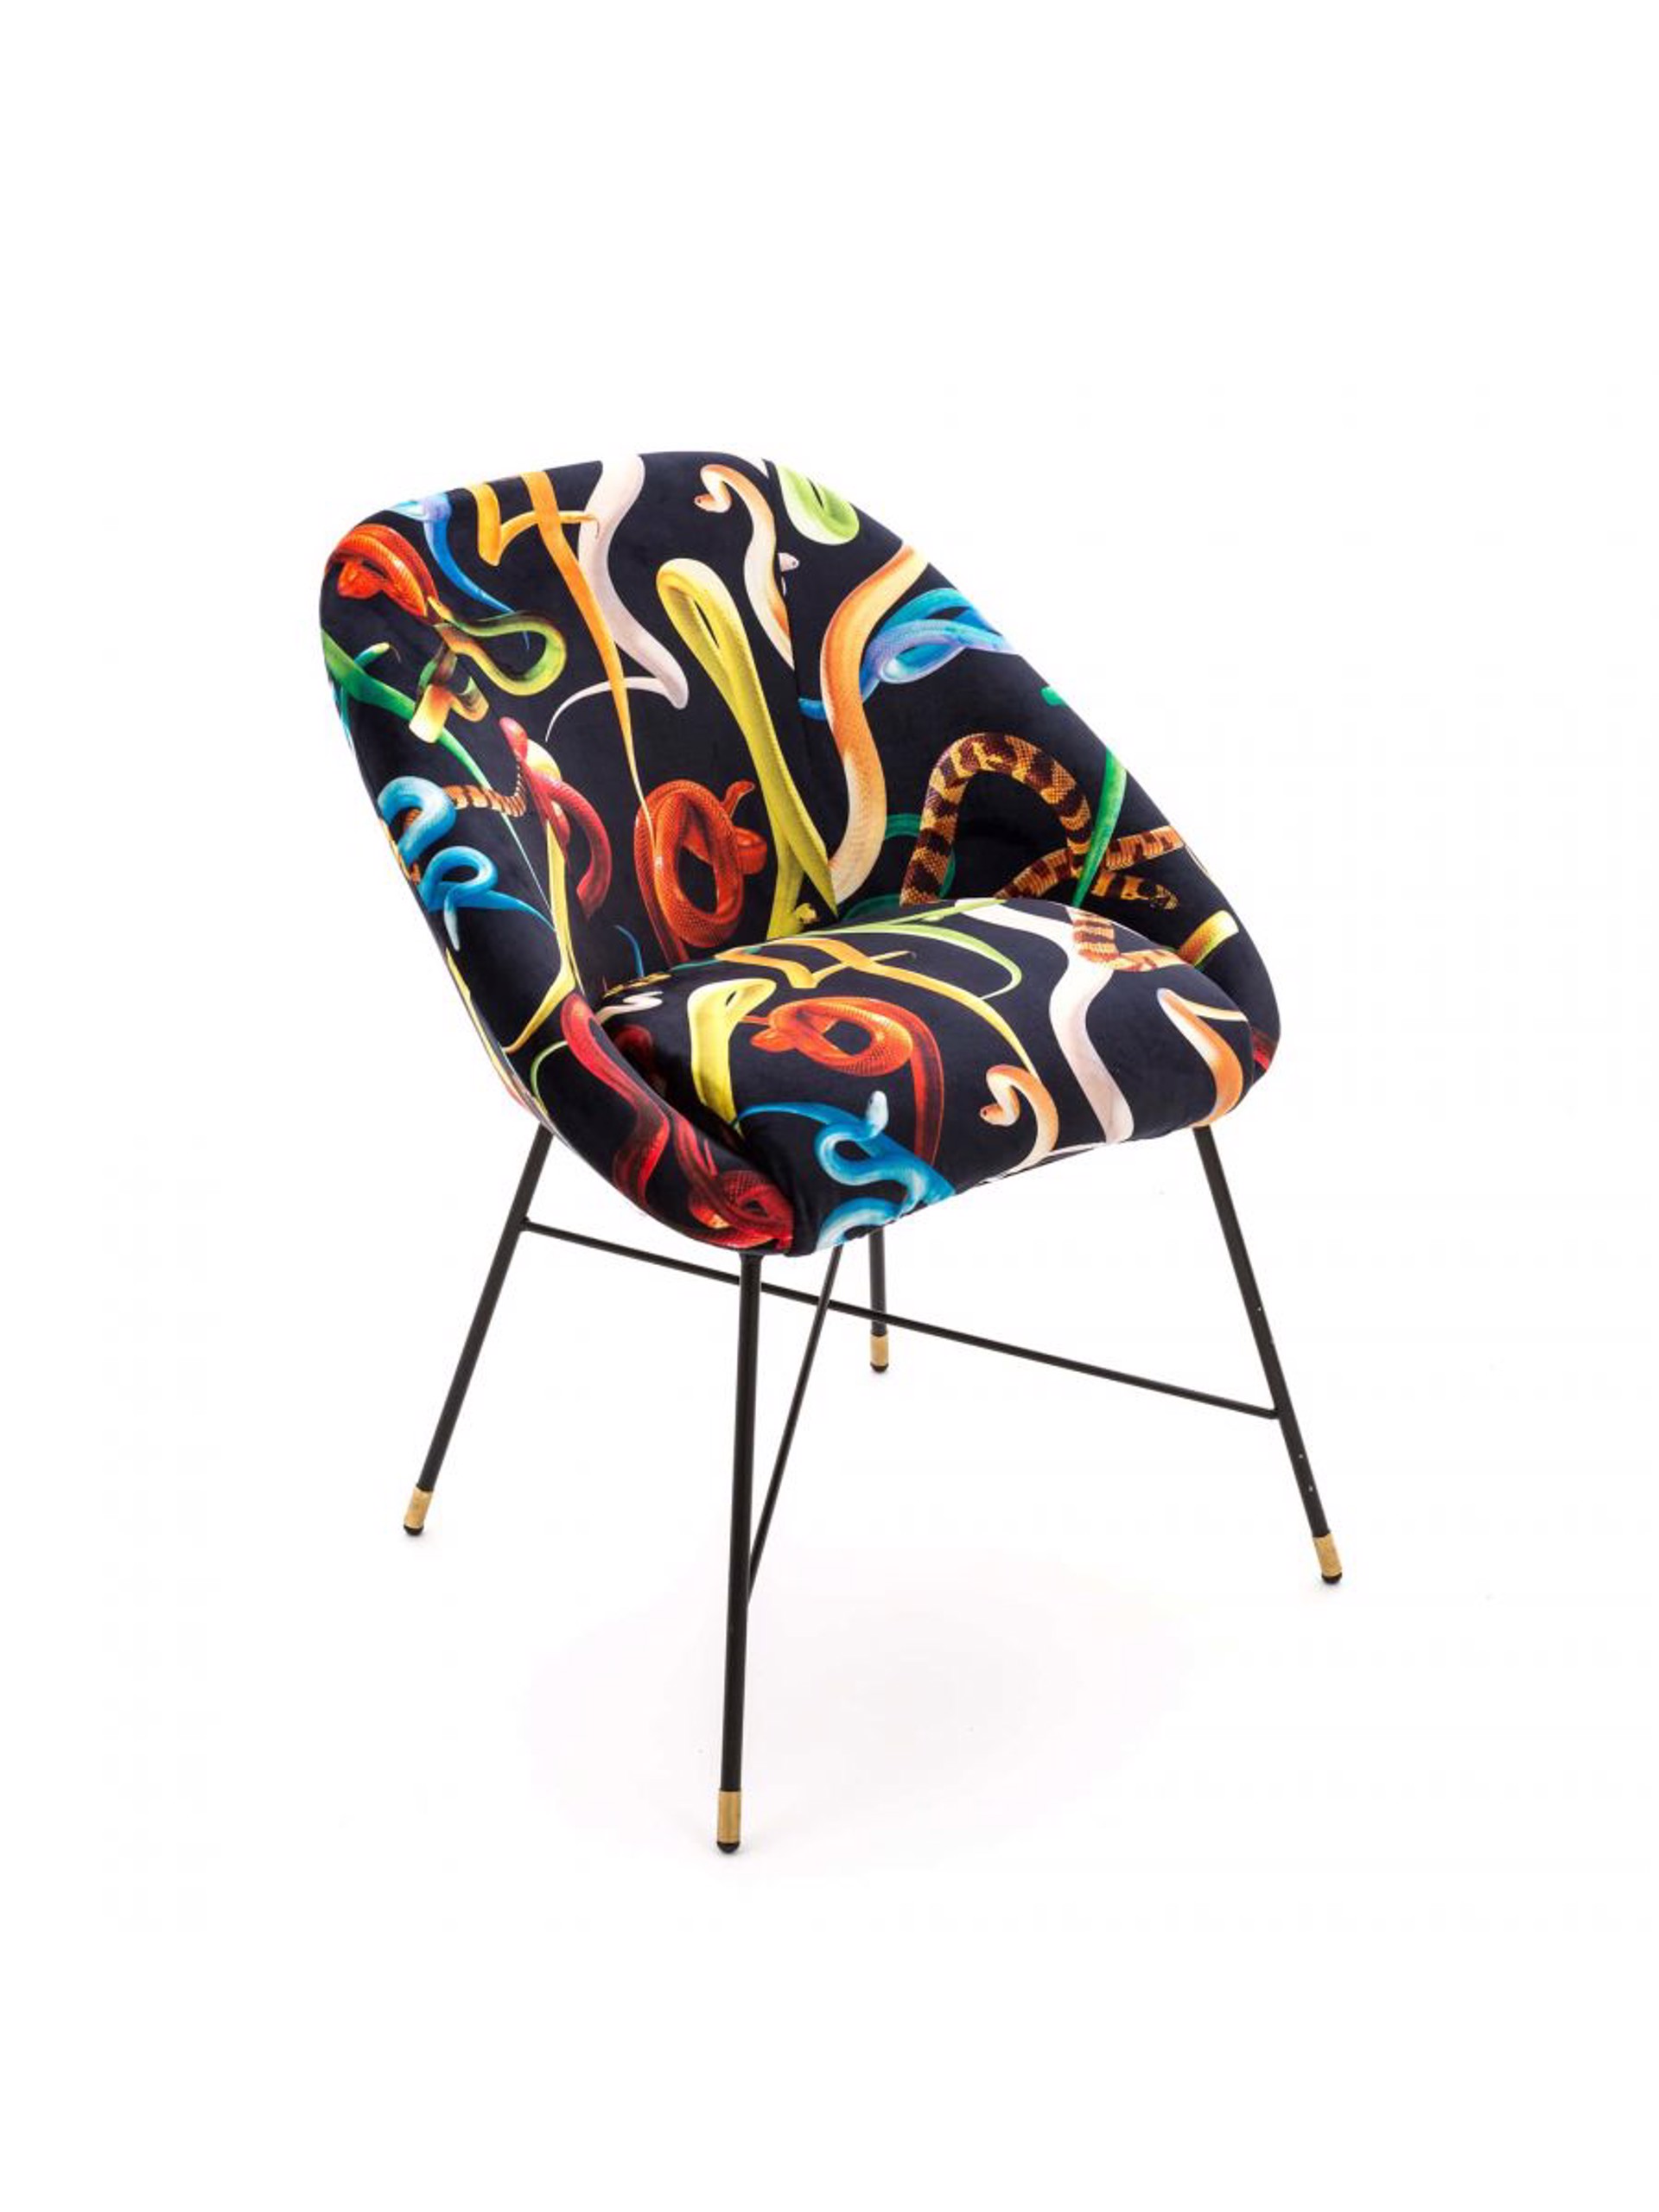 Padded Chair Snakes